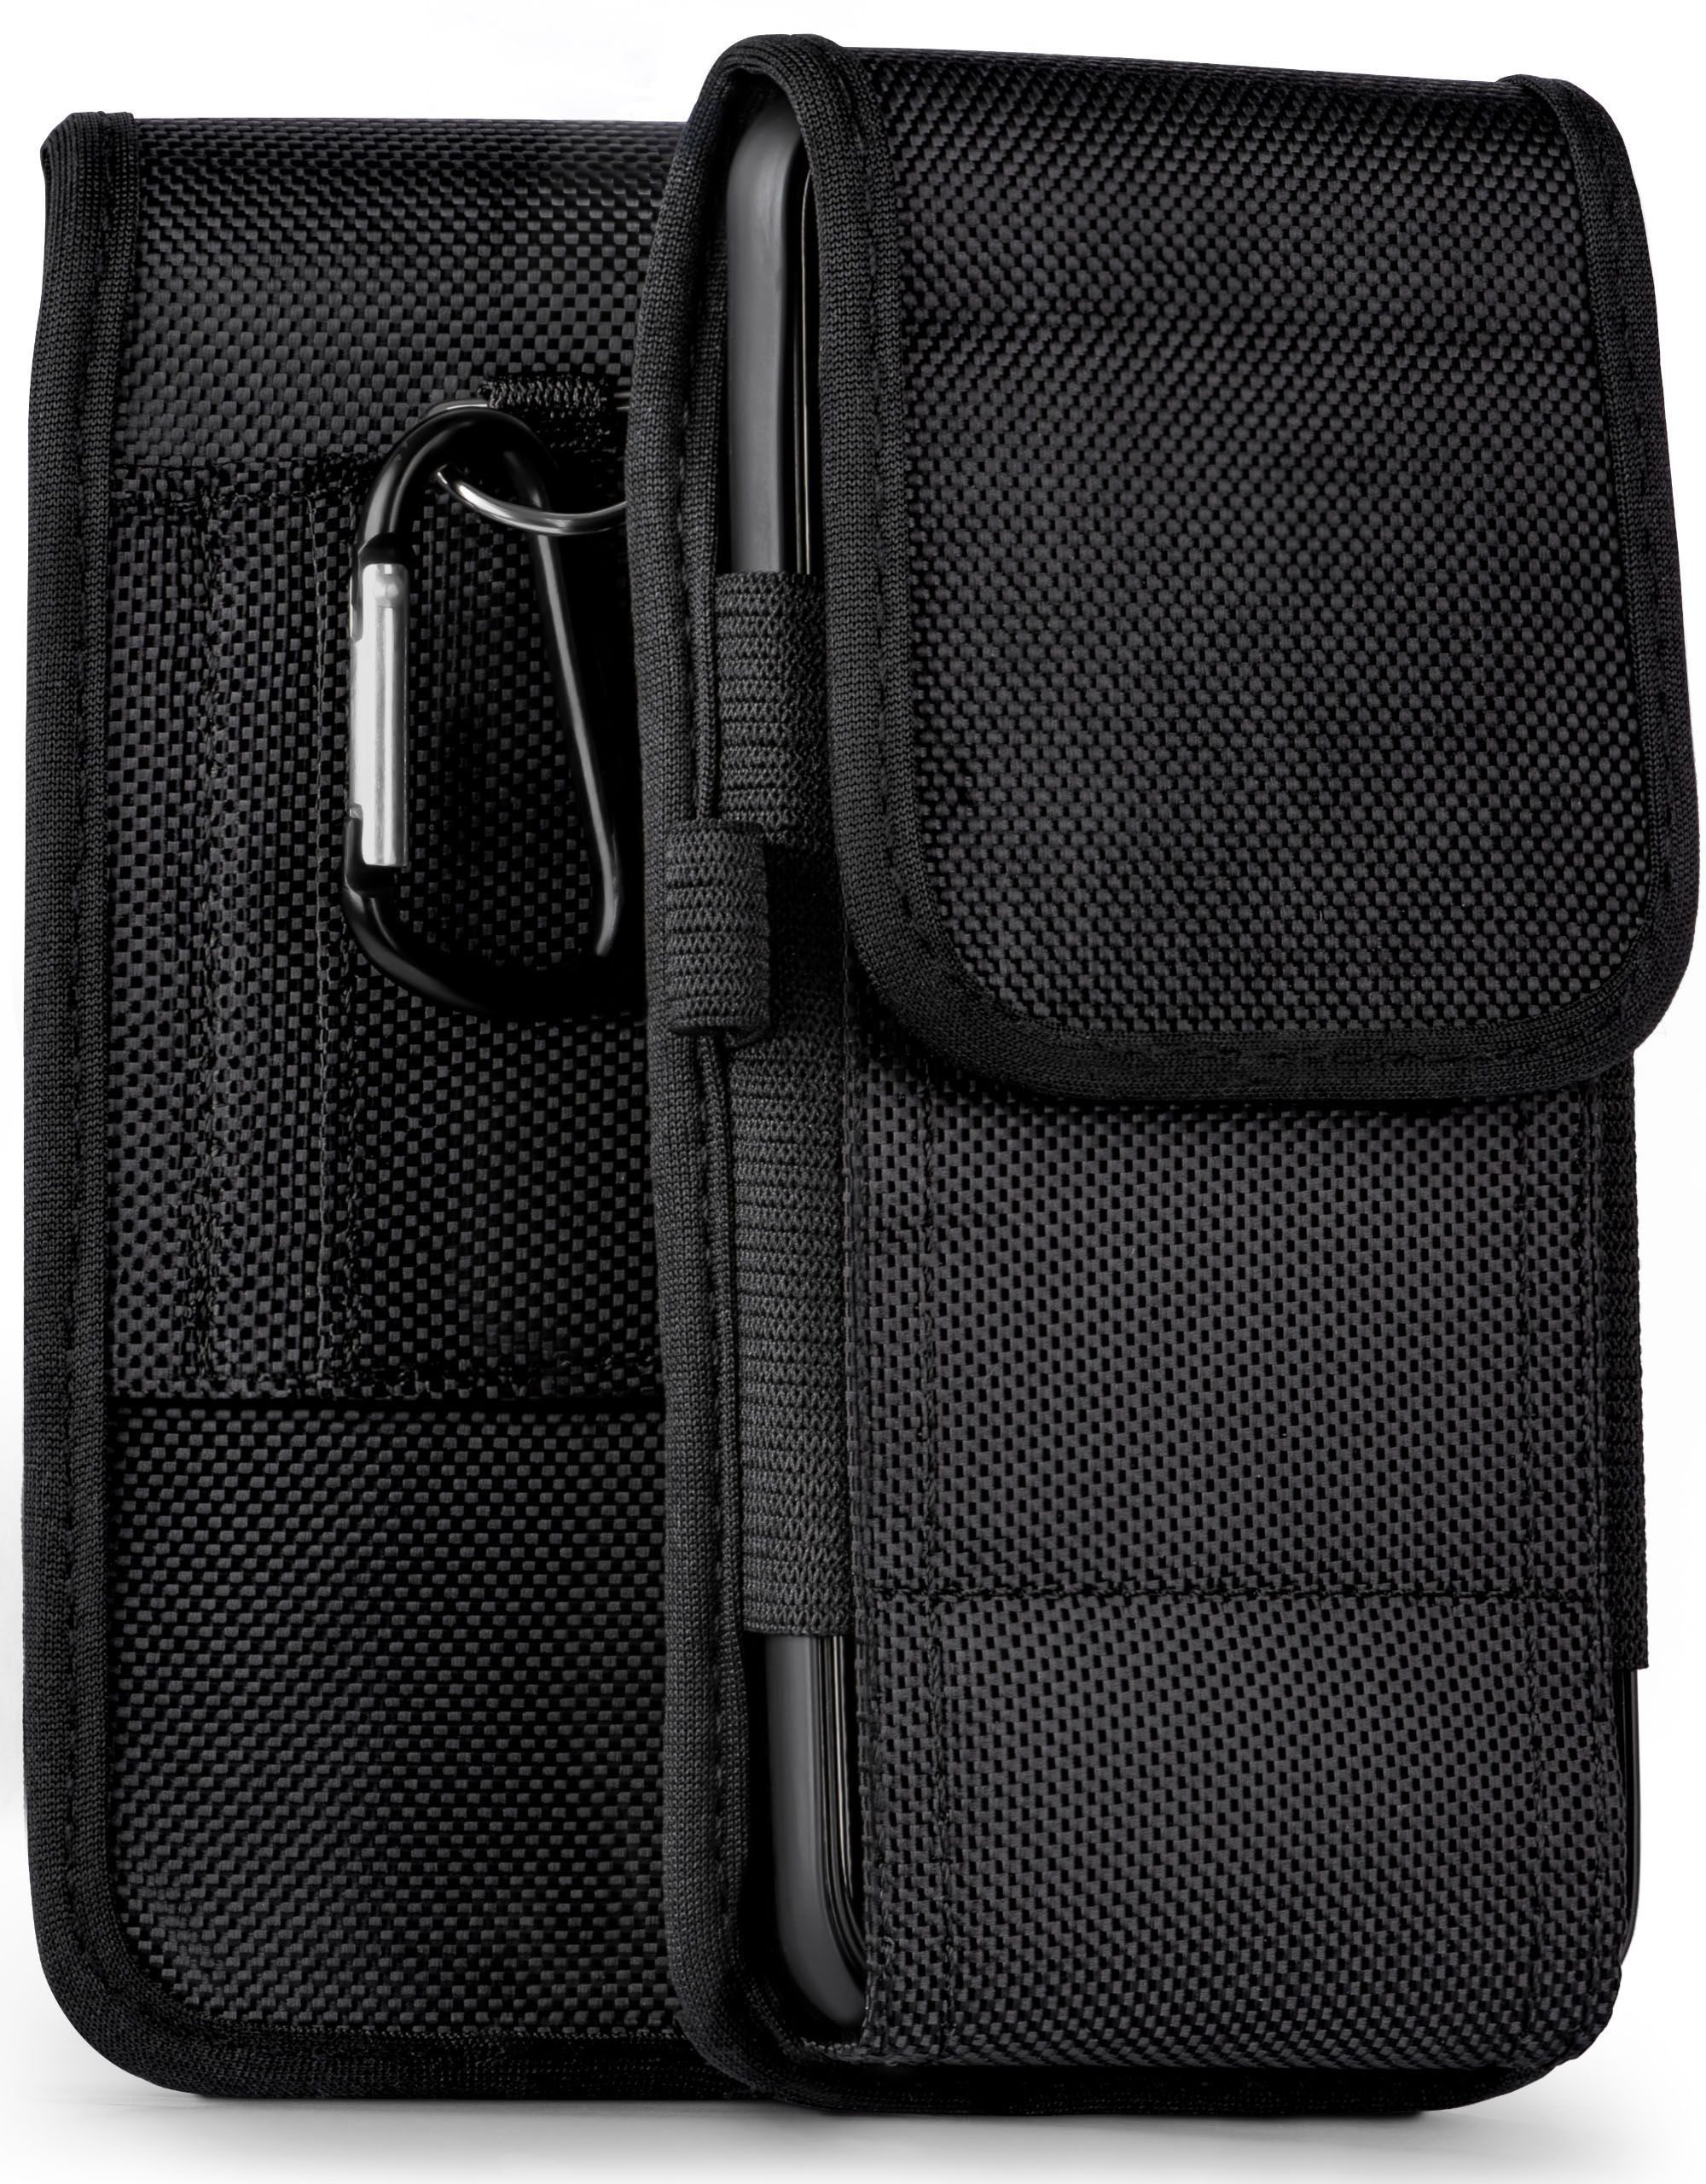 MOEX Agility Case, Holster, Trail ZTE, Blade 2019, A5